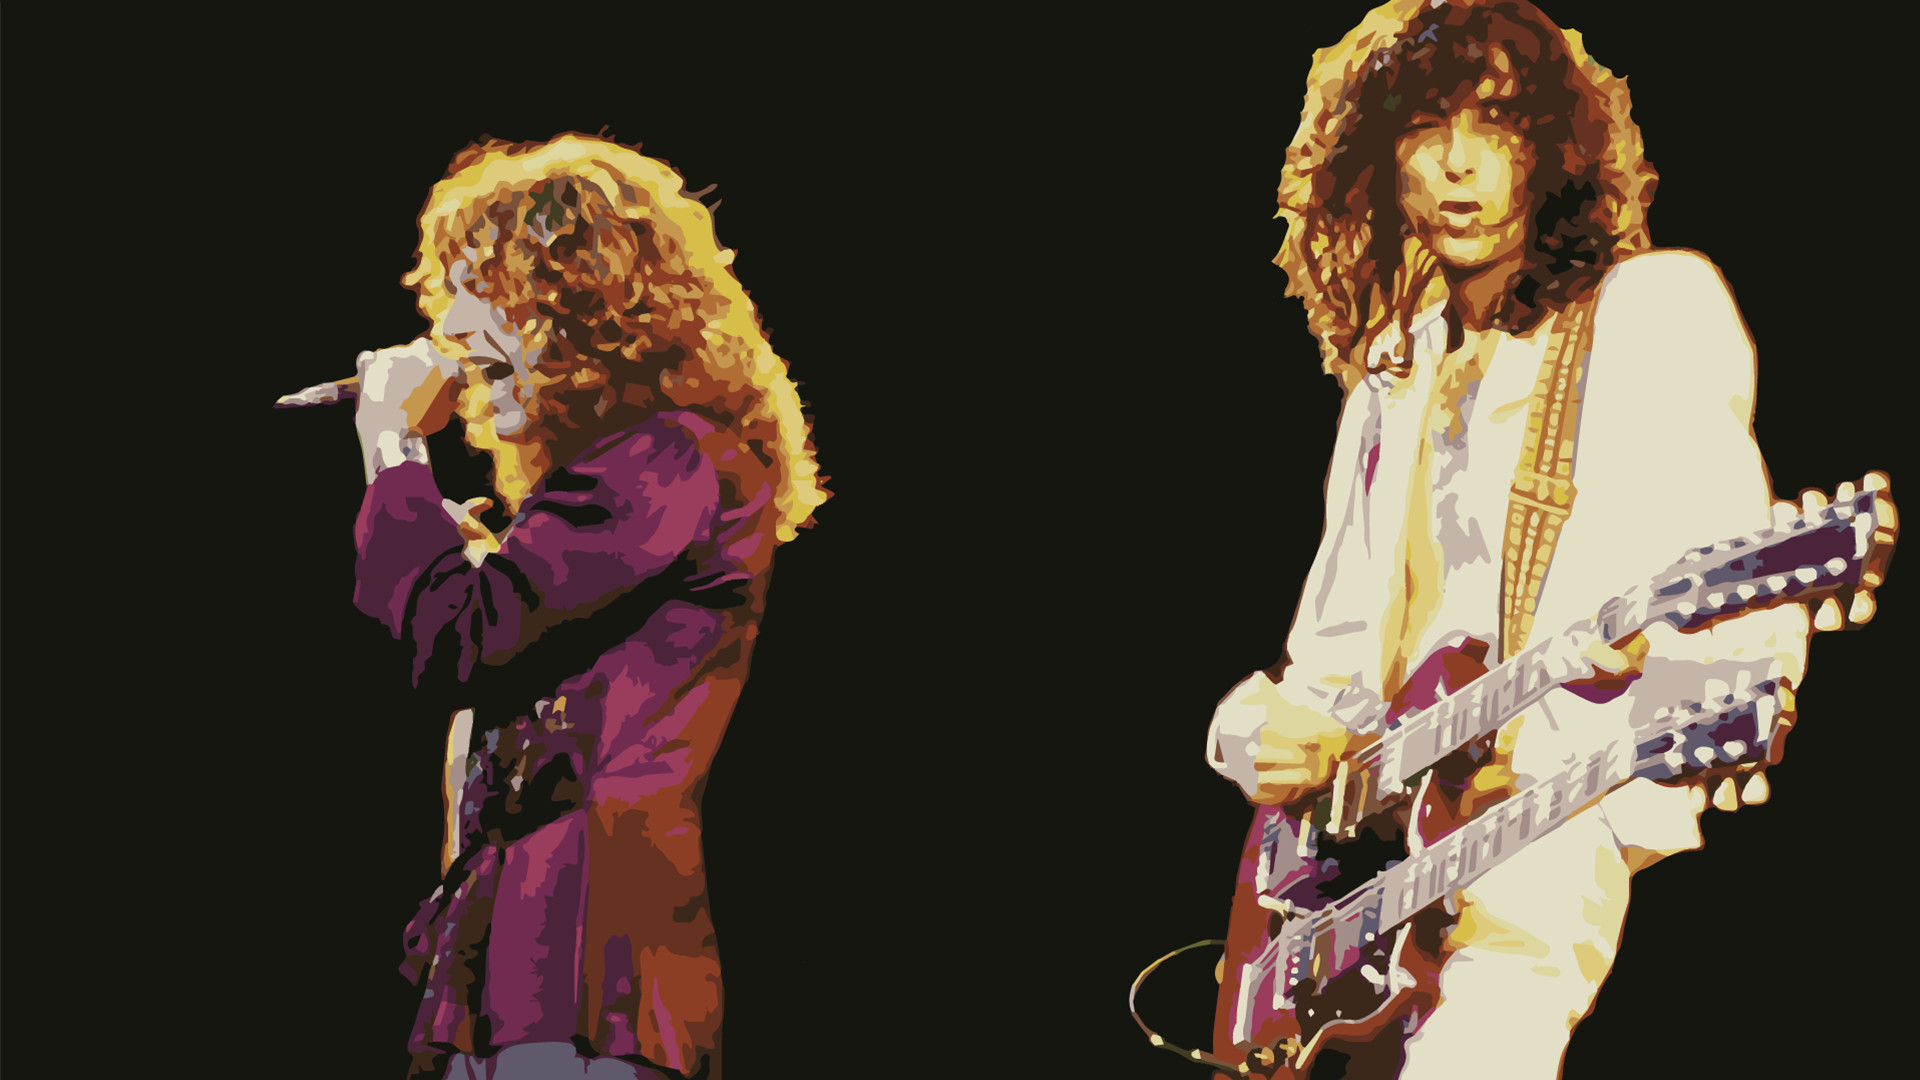 1920x1080 The Best Led Zeppelin Wallpapers